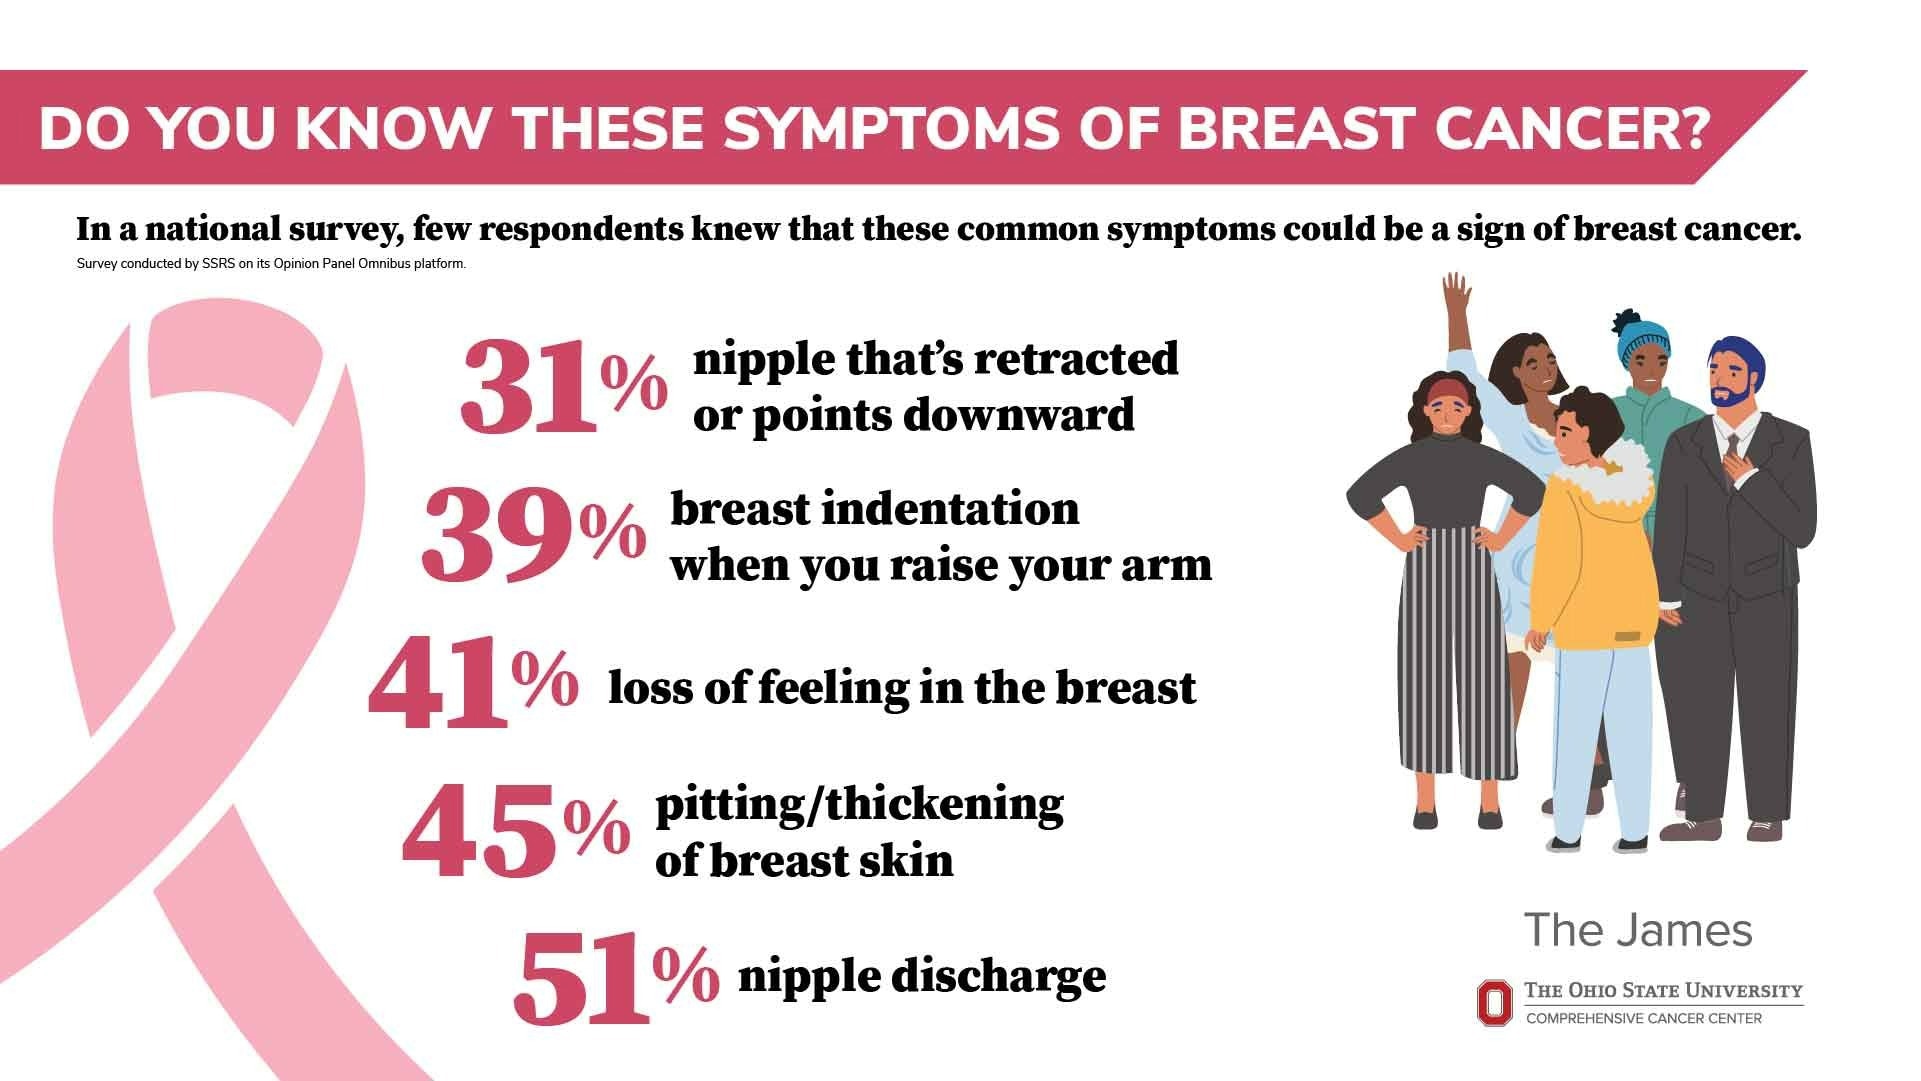 Knowledge gaps in identifying subtle breast cancer symptoms exposed by  survey